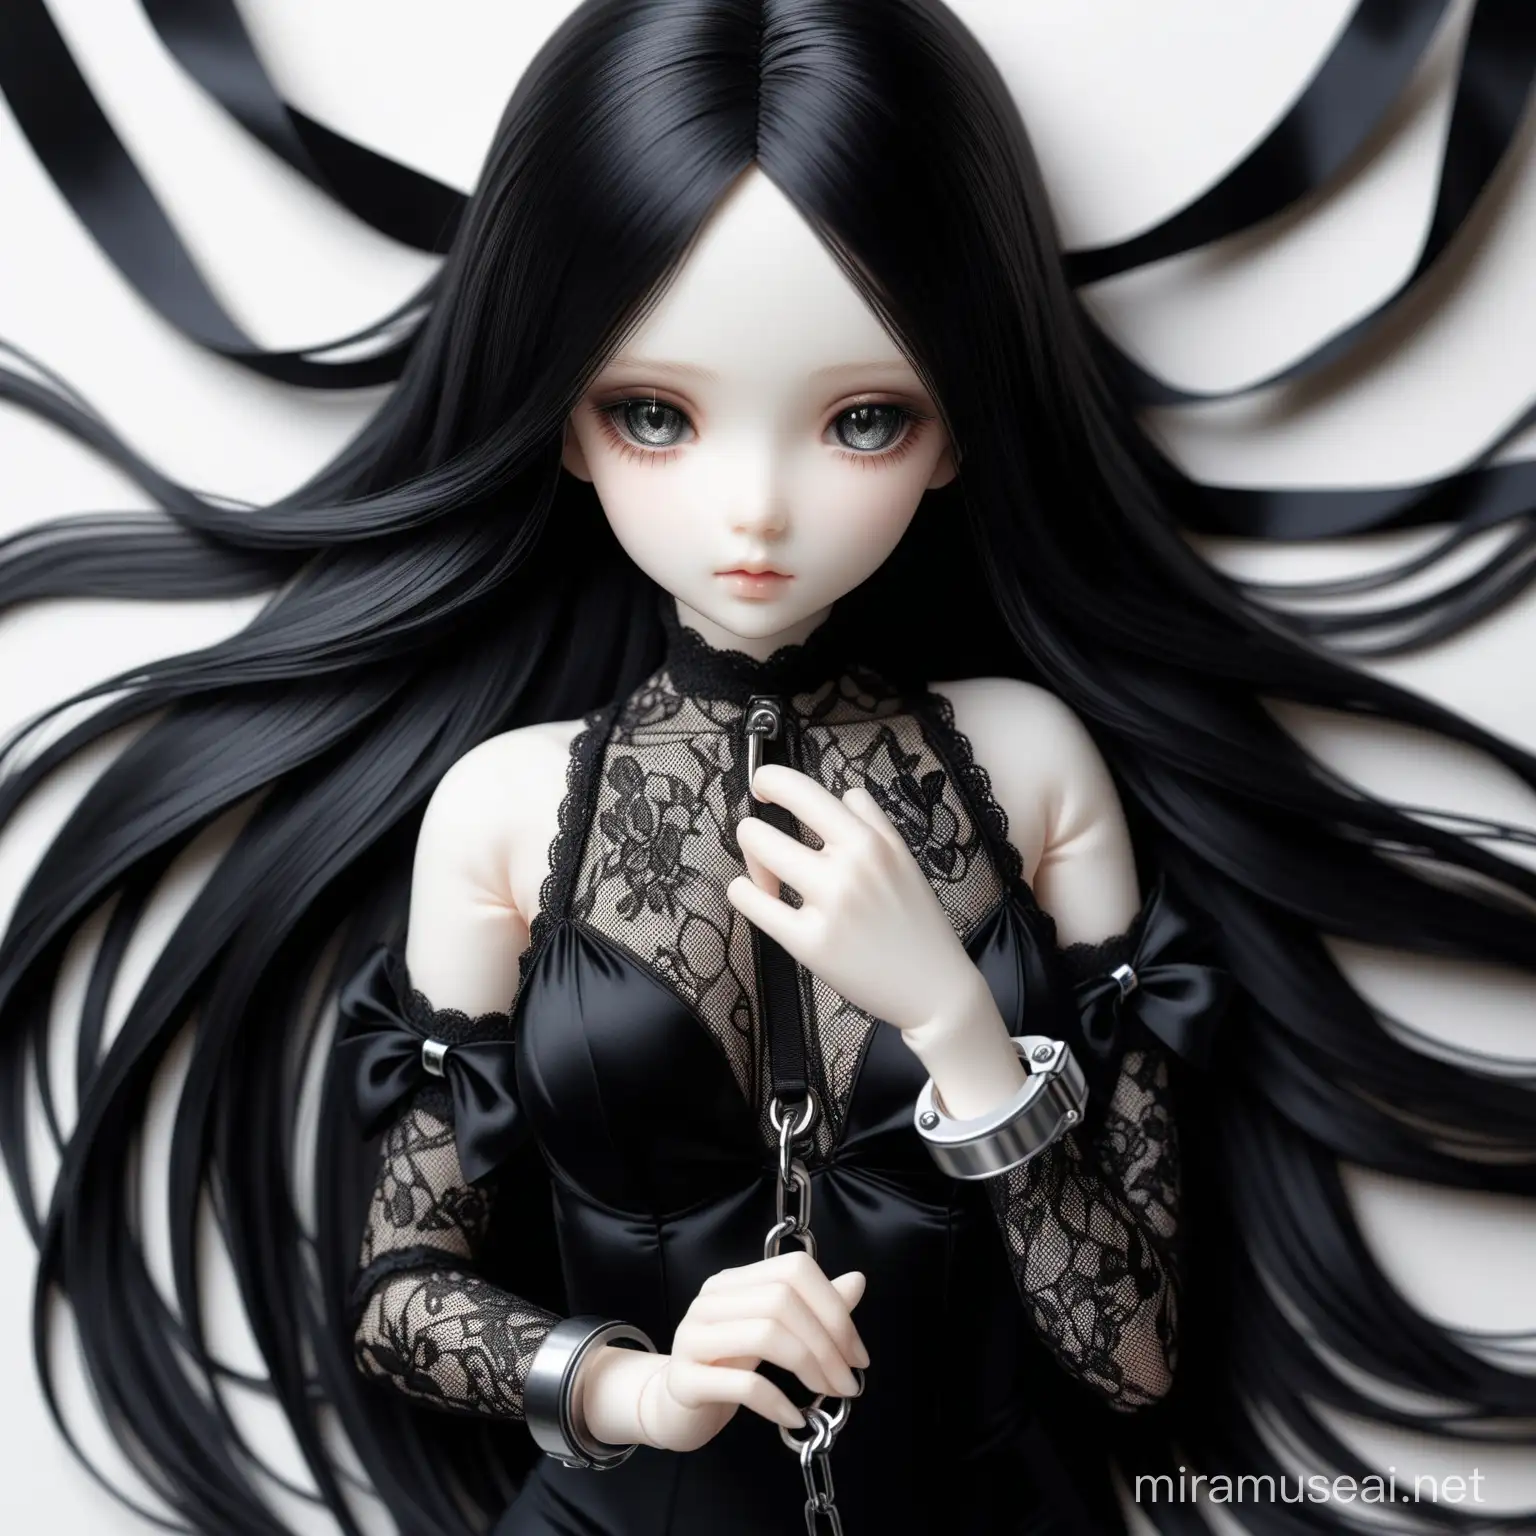 hyper detailed, hyperrealism, jointed BJD doll, body pale white skin, smokey eyes, very long black hair, very long straight hair, hyper detailed, hyperrealism, a girl in a lace bodysuit, black silk ribbons, black silk bows on her hands, handcuffs made of silk ribbons, top view